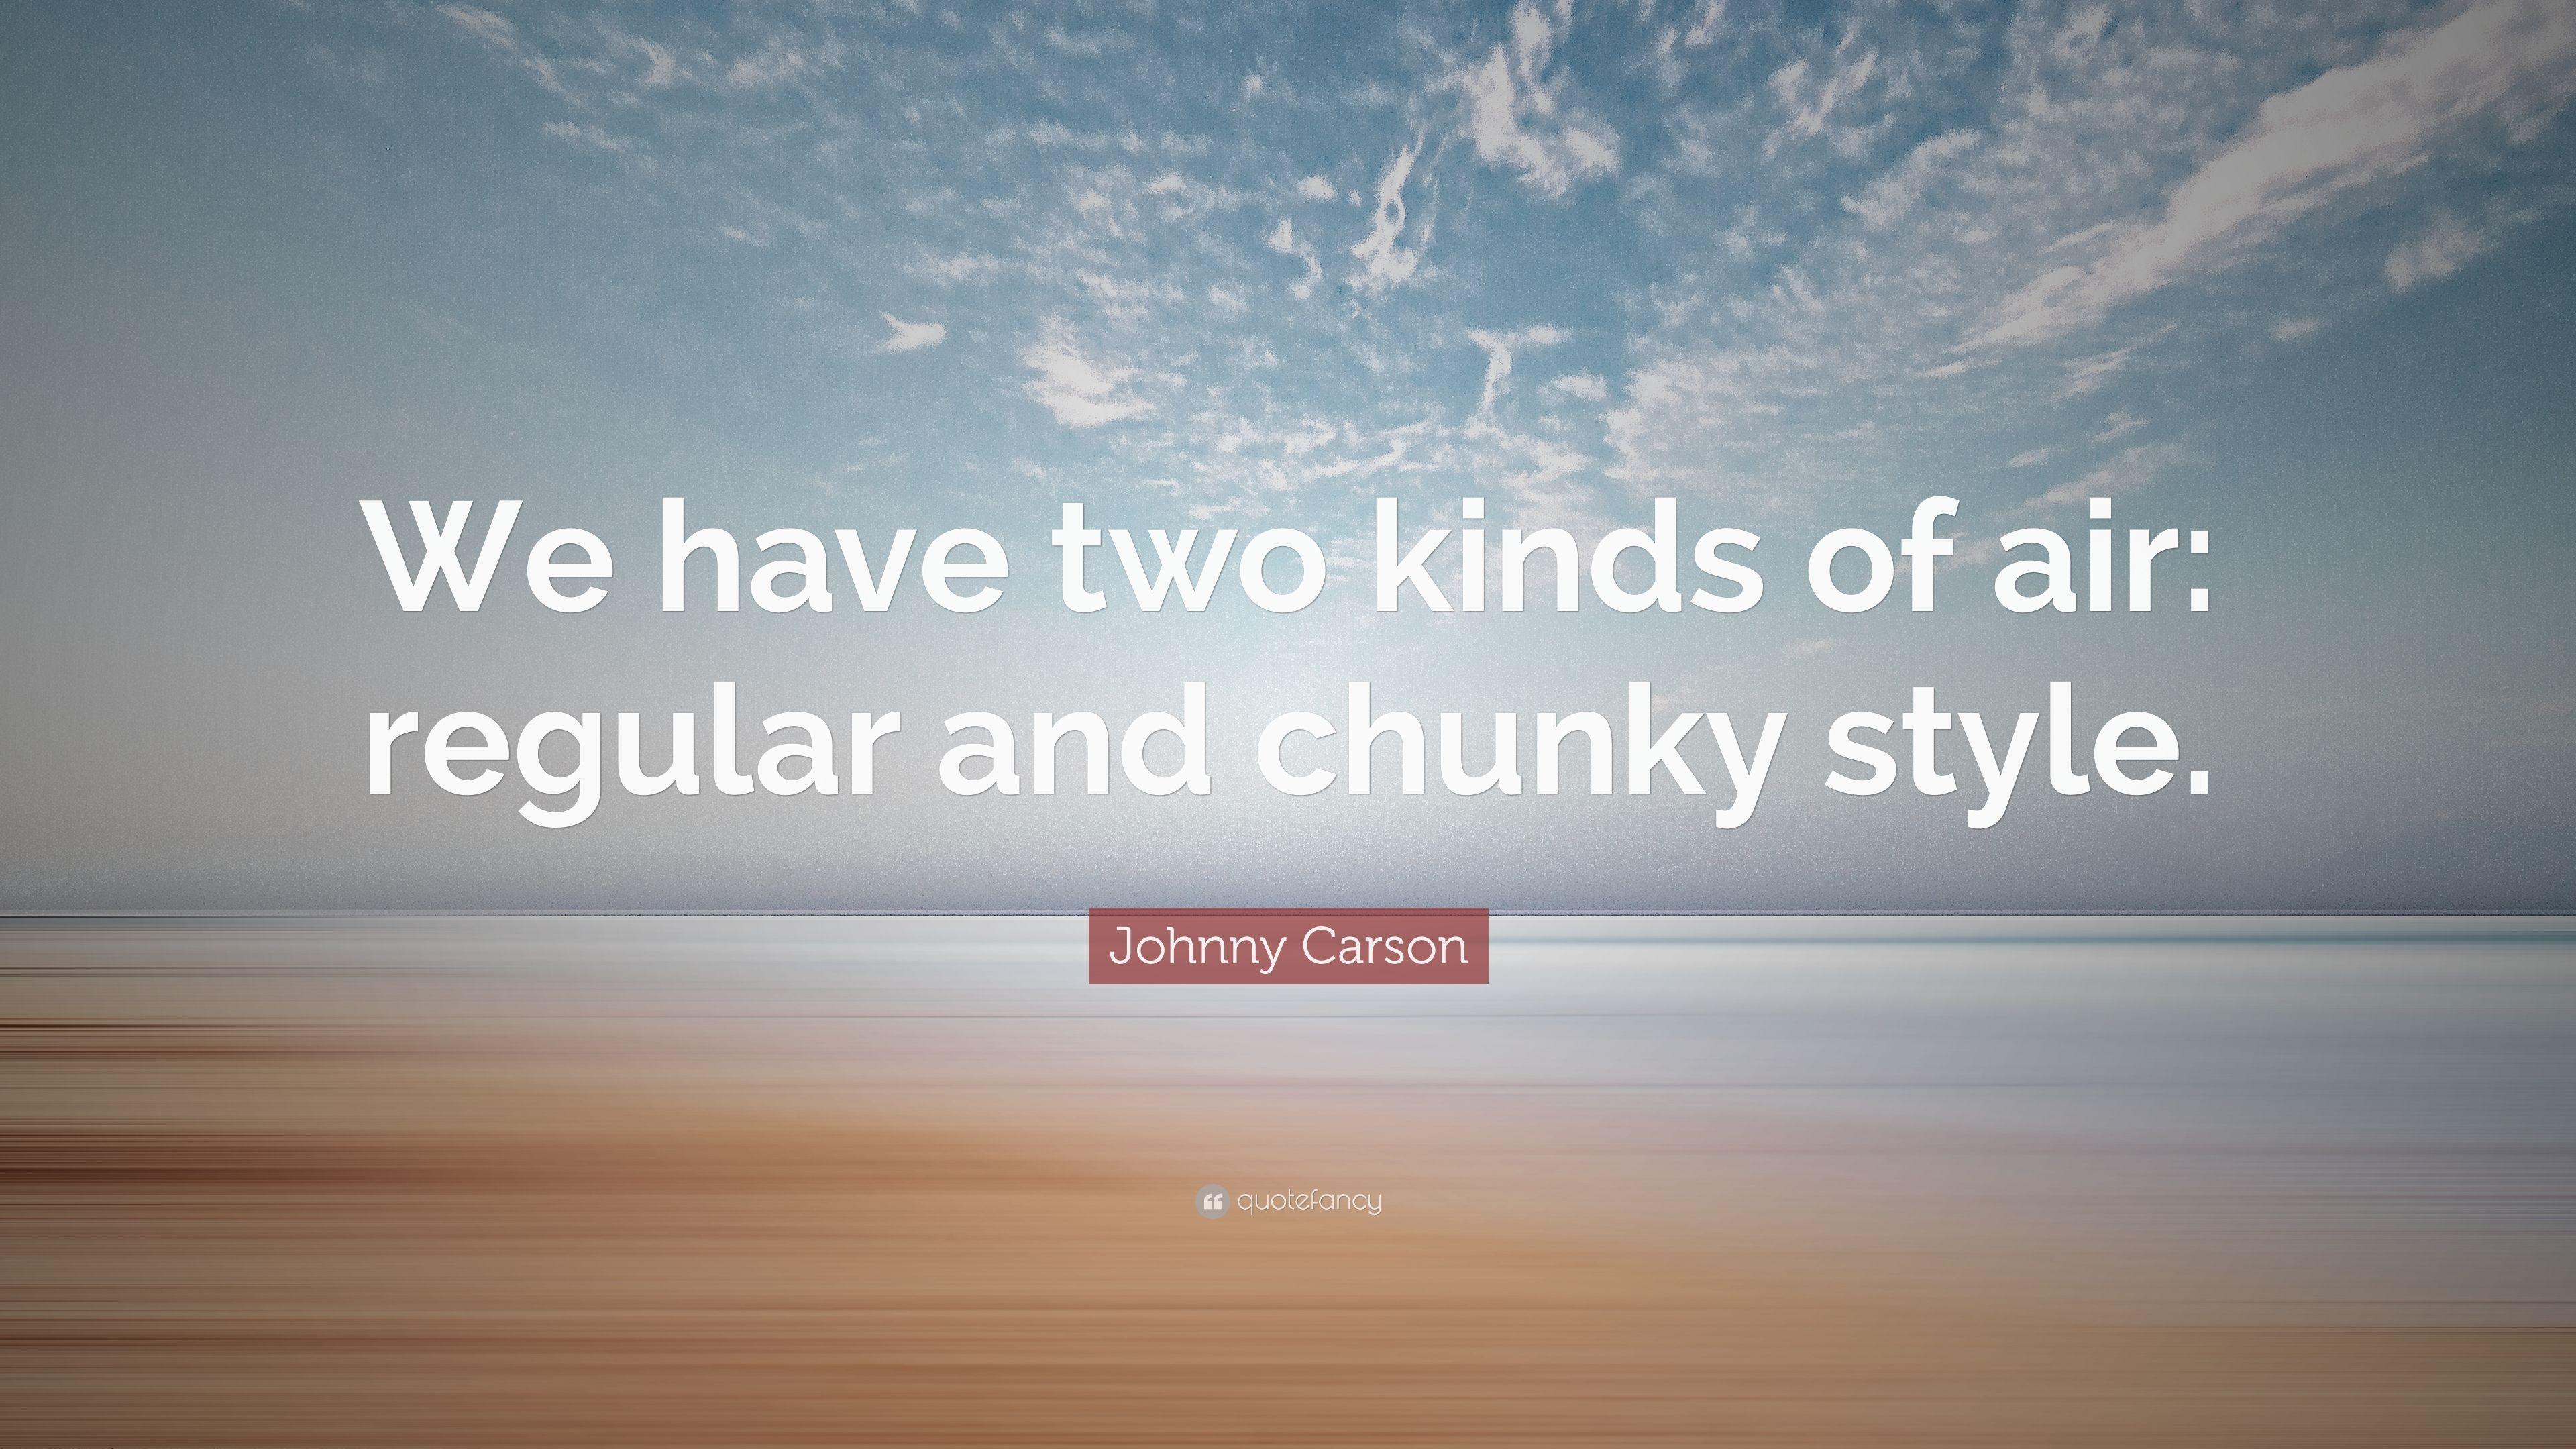 Johnny Carson Quote: “We have two kinds of air: regular